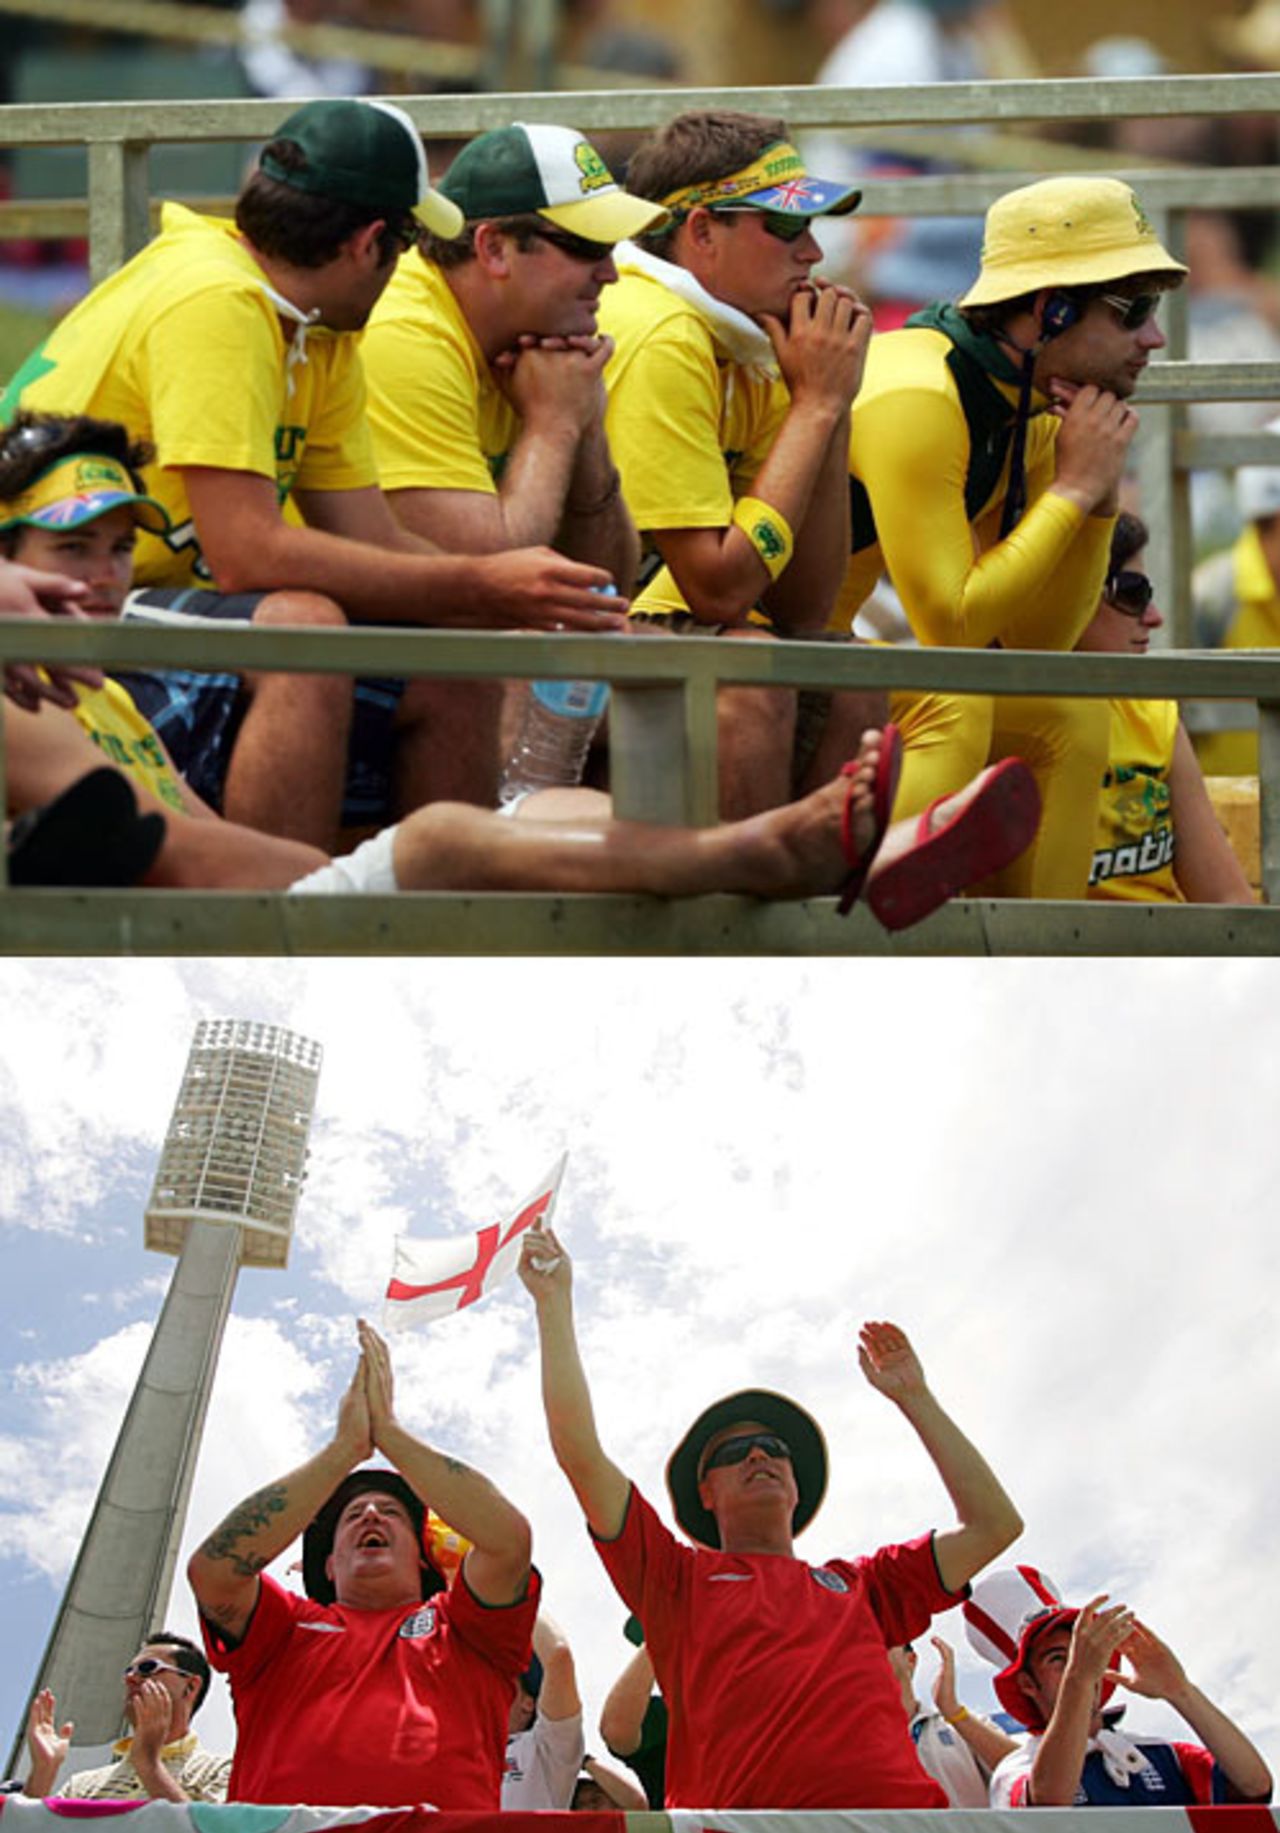 The tension and excitement: Australia fans look pensive; England supporters euphoric. But it was short-lived, Australia v England, 3rd Test, Perth, December 18, 2006